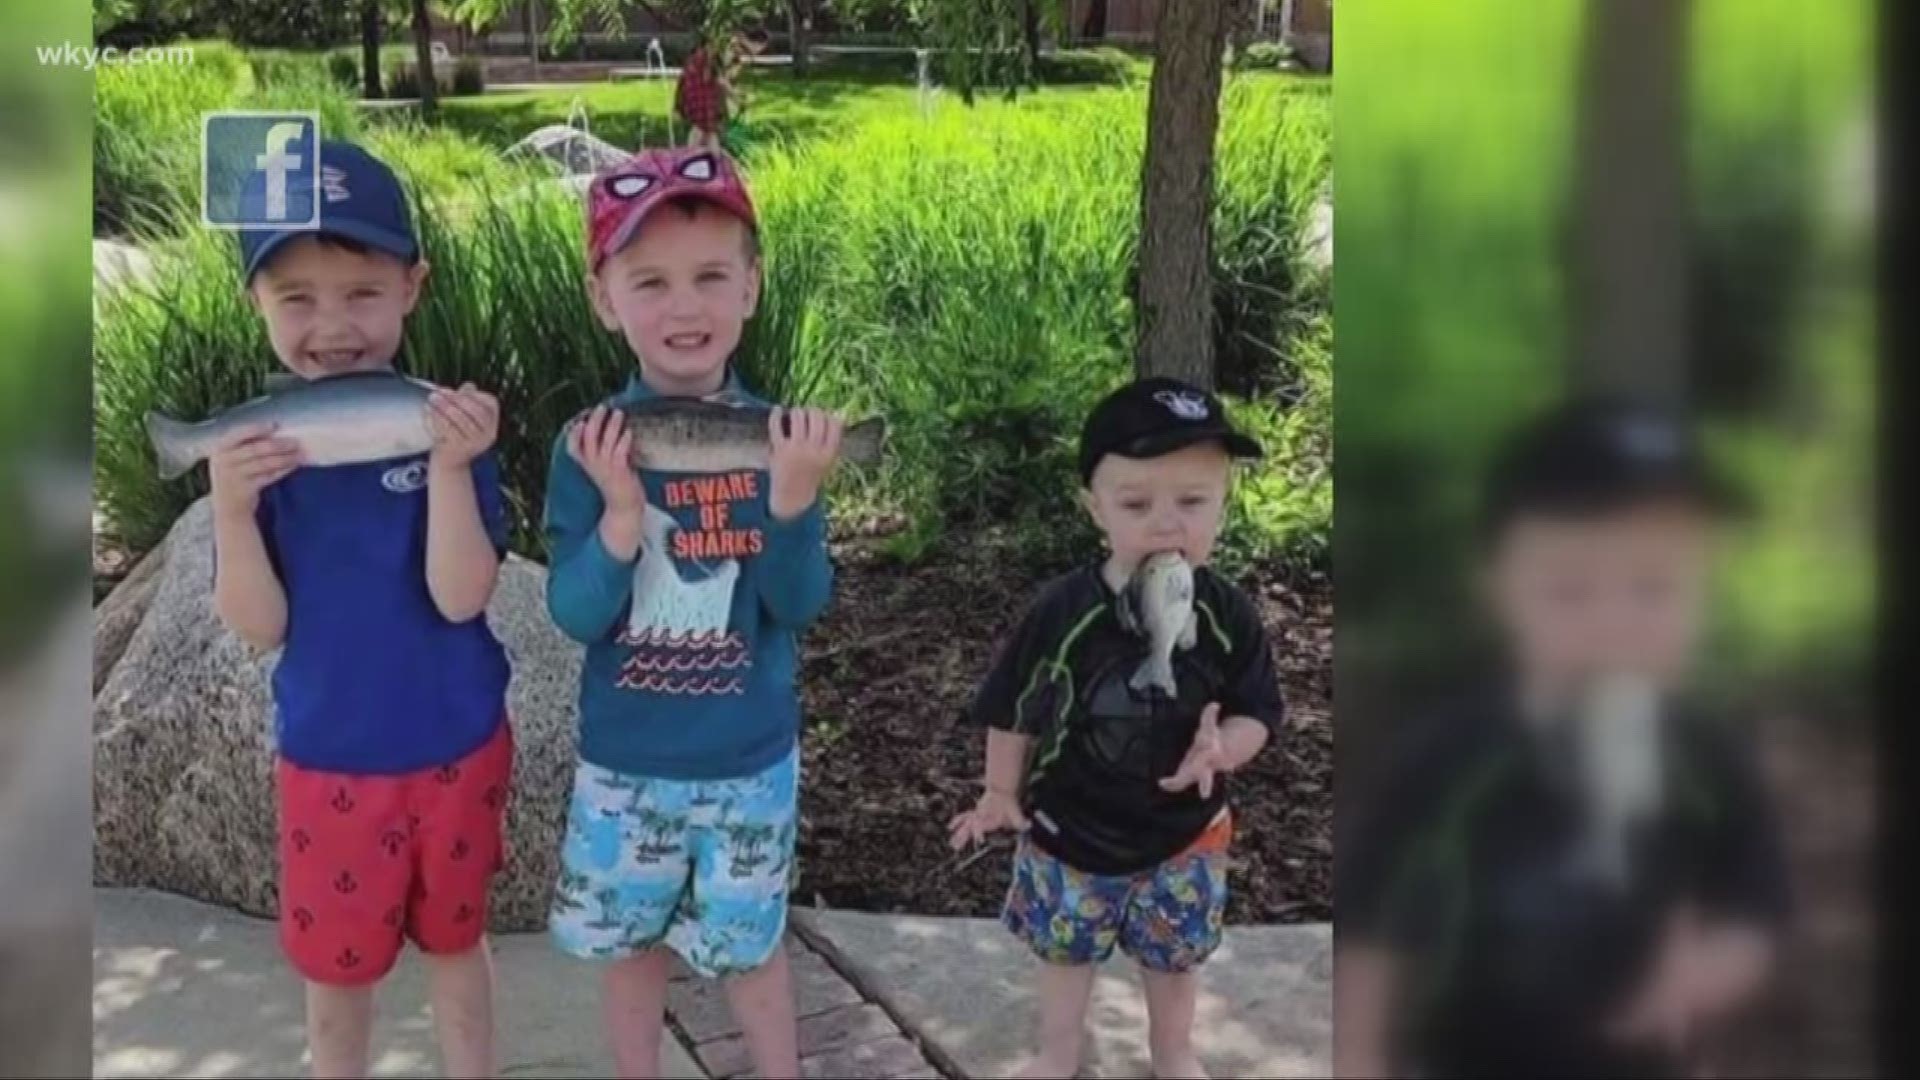 July 10, 2019: You have got to see this! There's a new photo taking social media by storm that shows three young boys showing off their big catch -- but instead of holding his fish, one of the boys shoved it in his mouth.